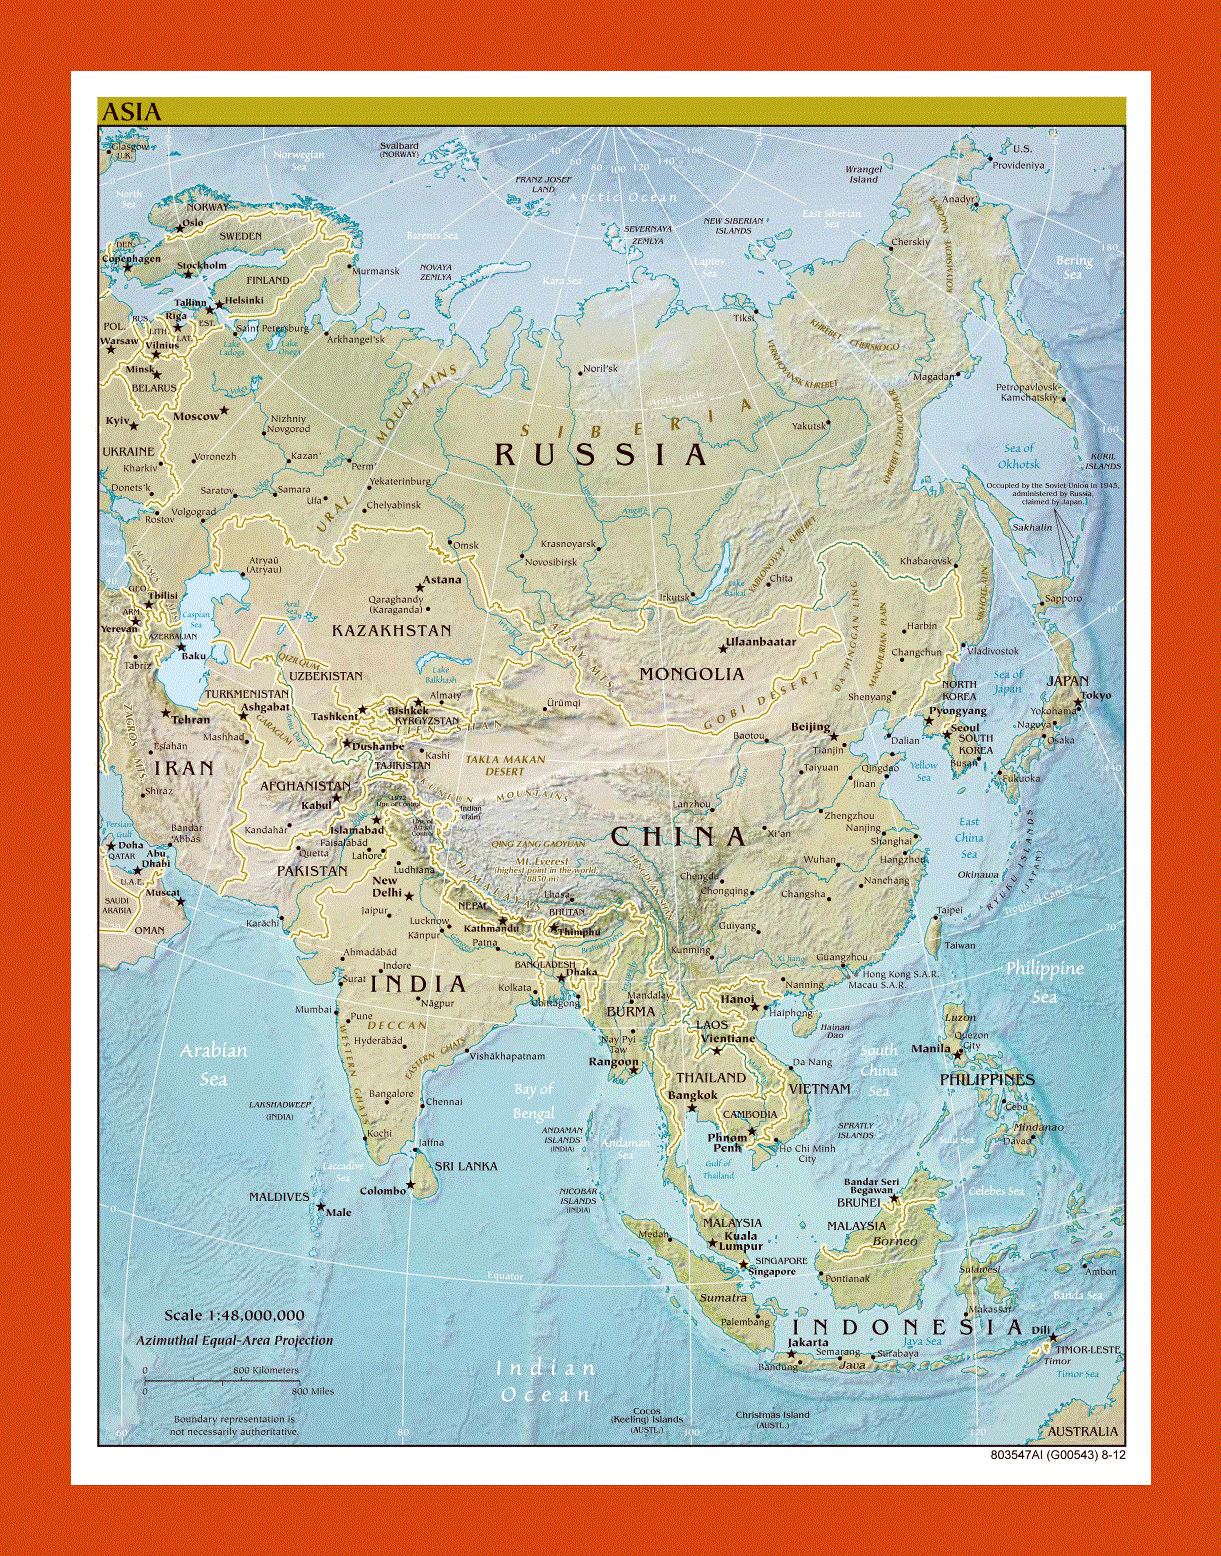 Political map of Asia - 2012